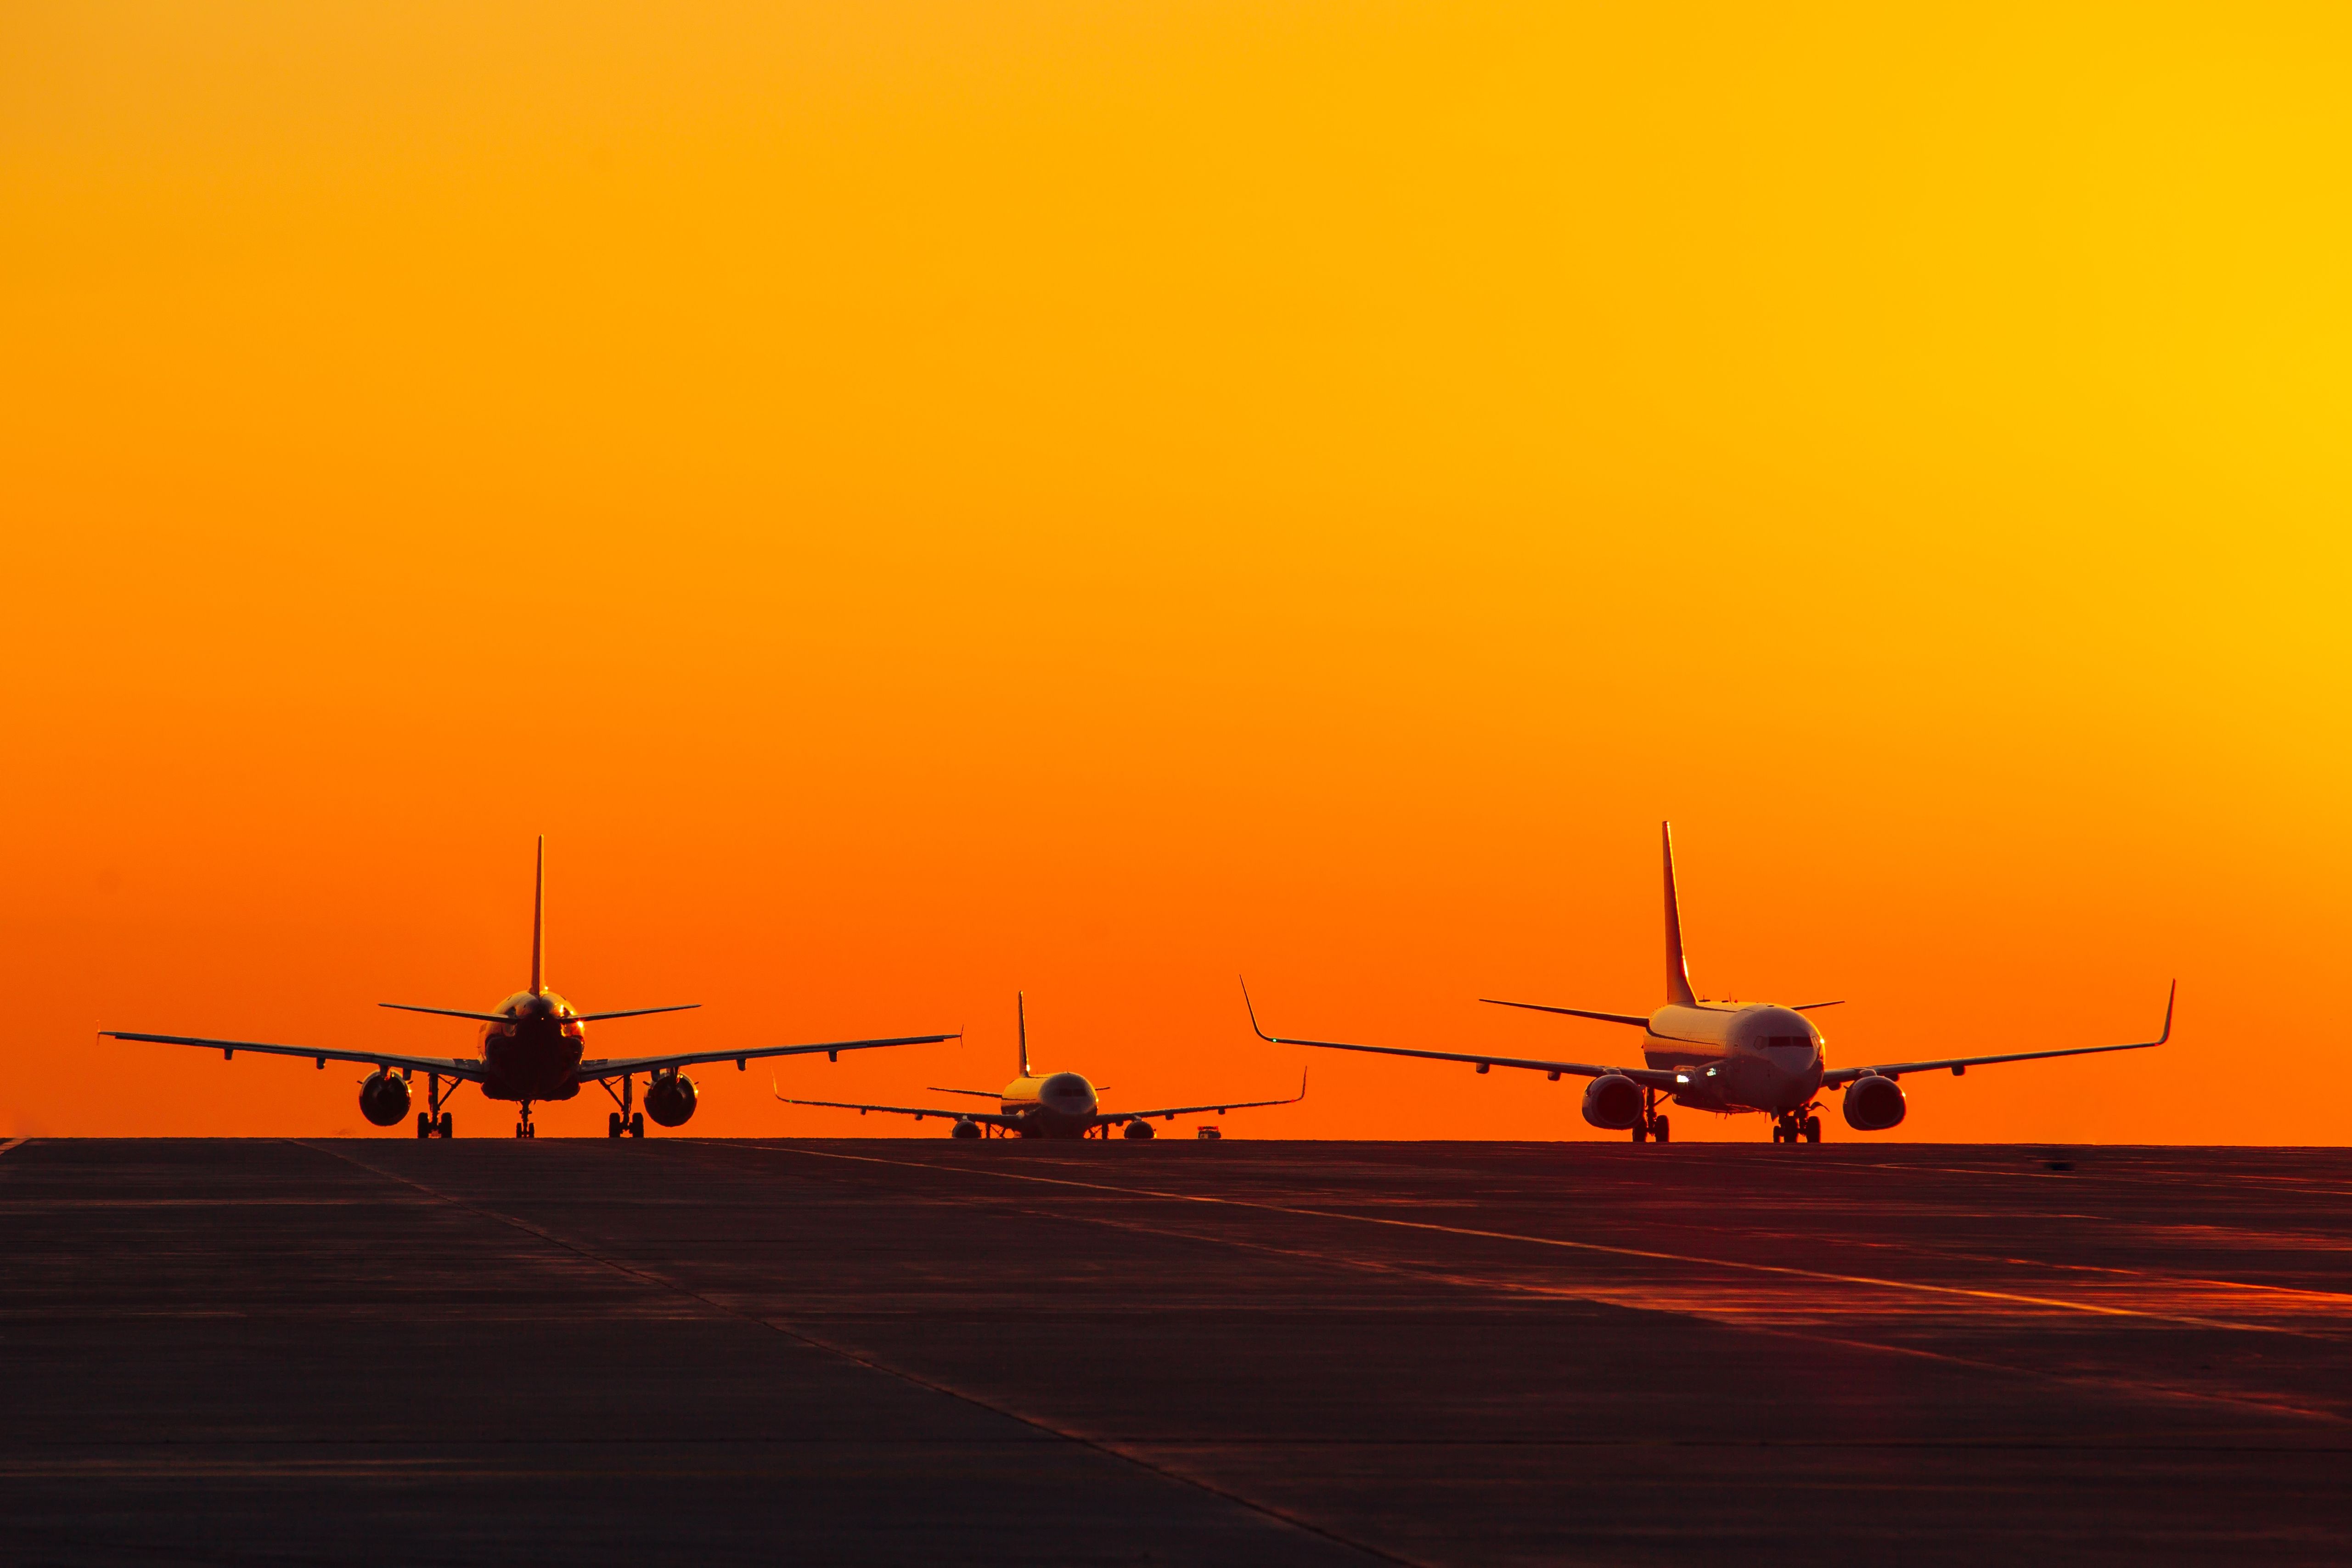 Three aircraft on an airport apron against a colorful sunset.